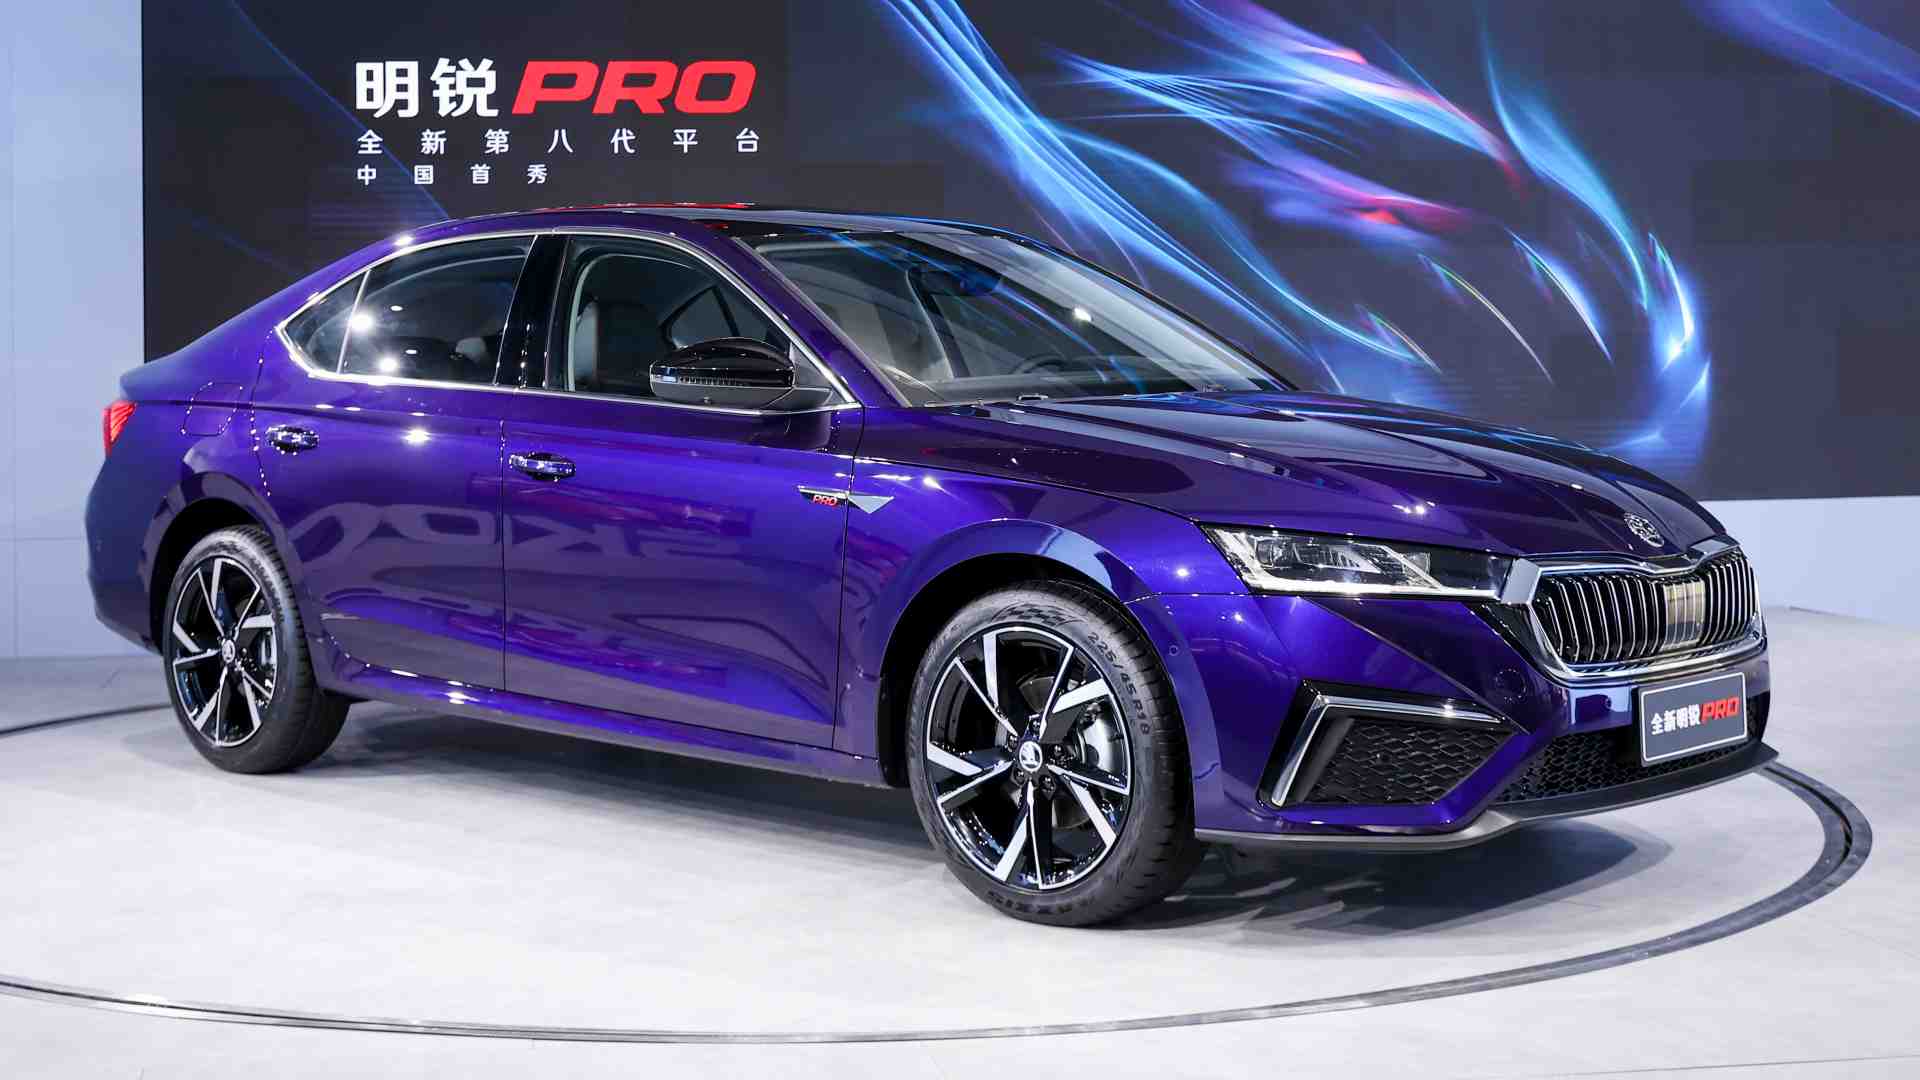 You are currently viewing Skoda Octavia Pro makes world premiere, has a longer wheelbase than the standard Octavia- Technology News, FP